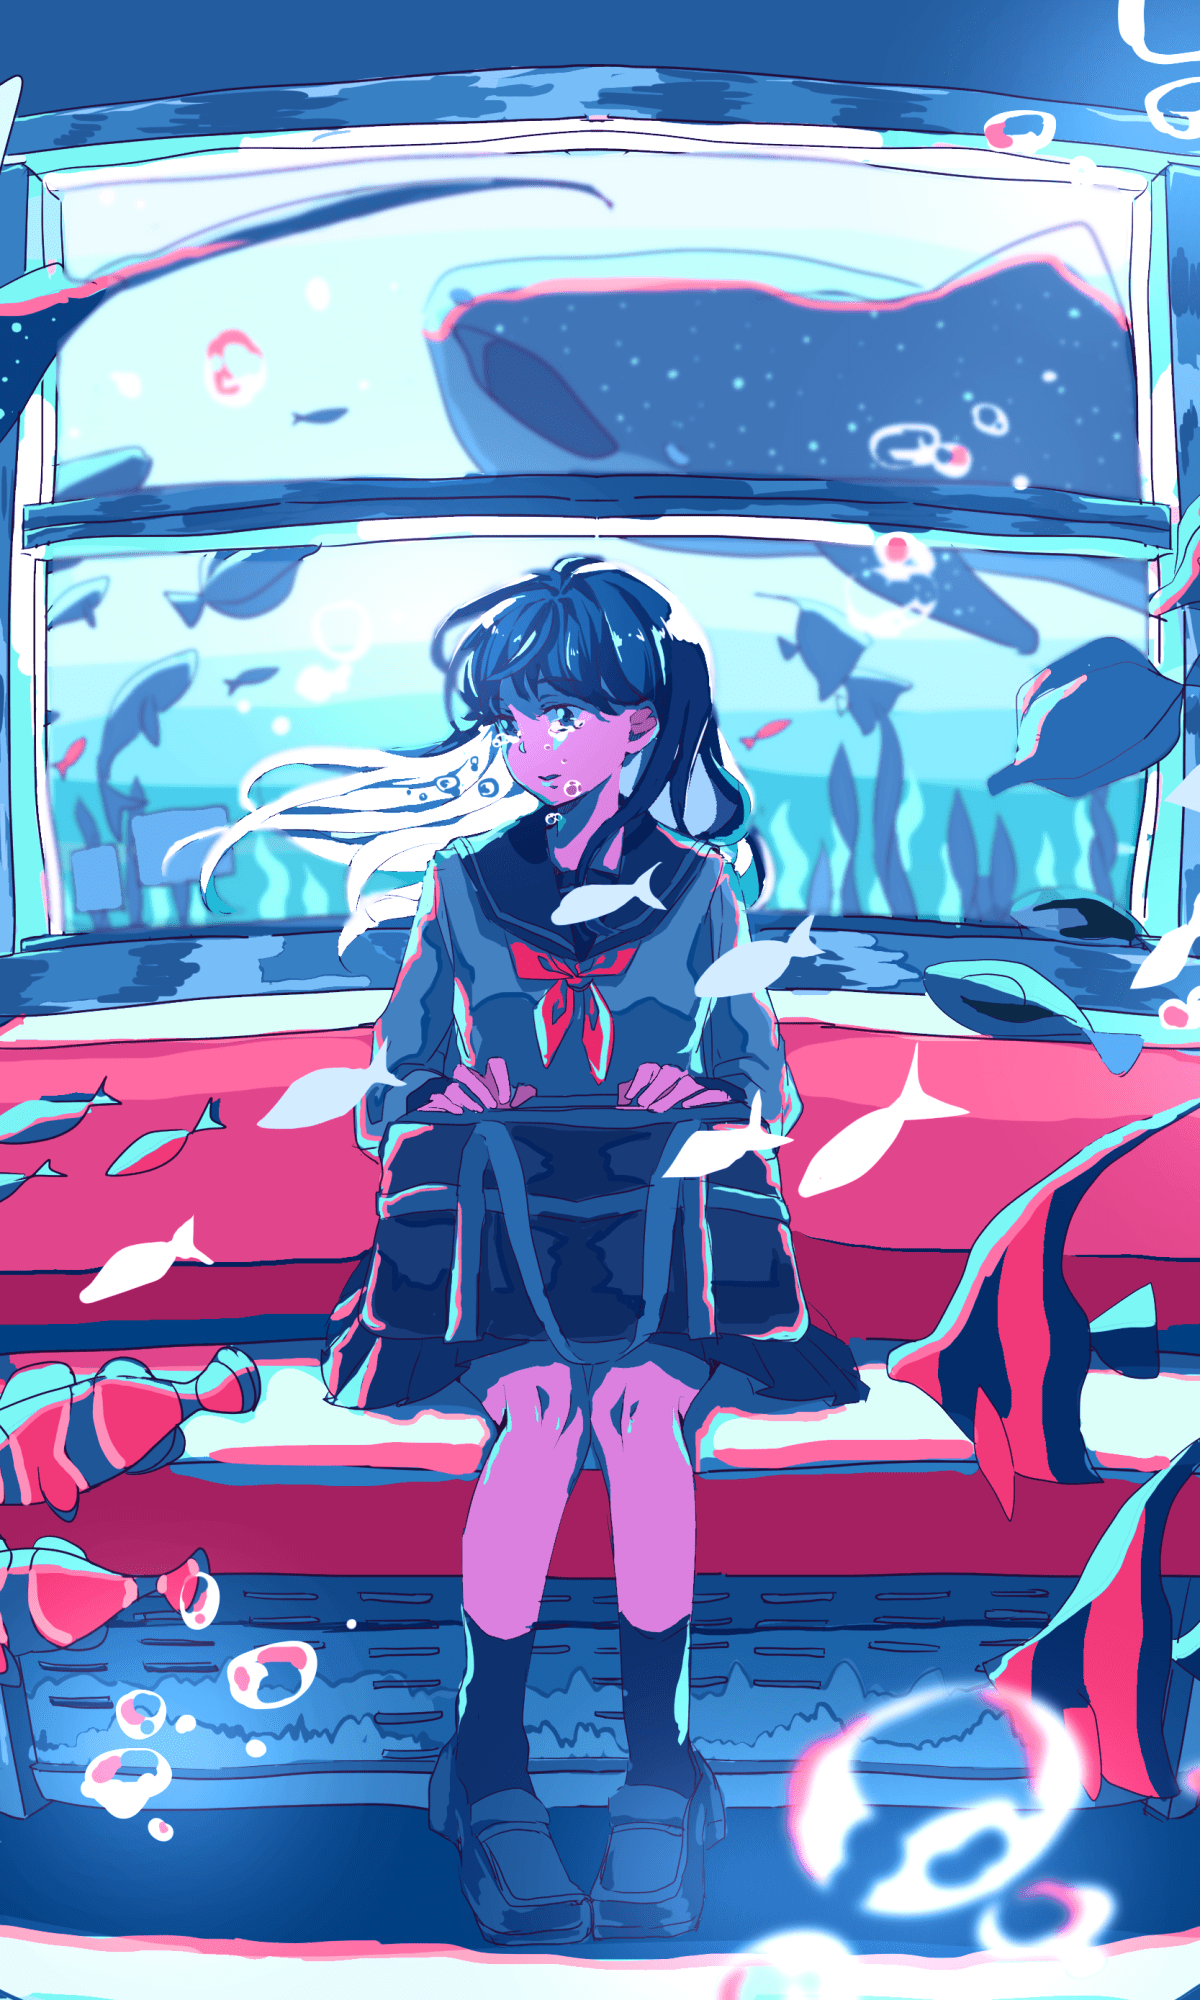 A girl sitting in the back of an old car - Underwater